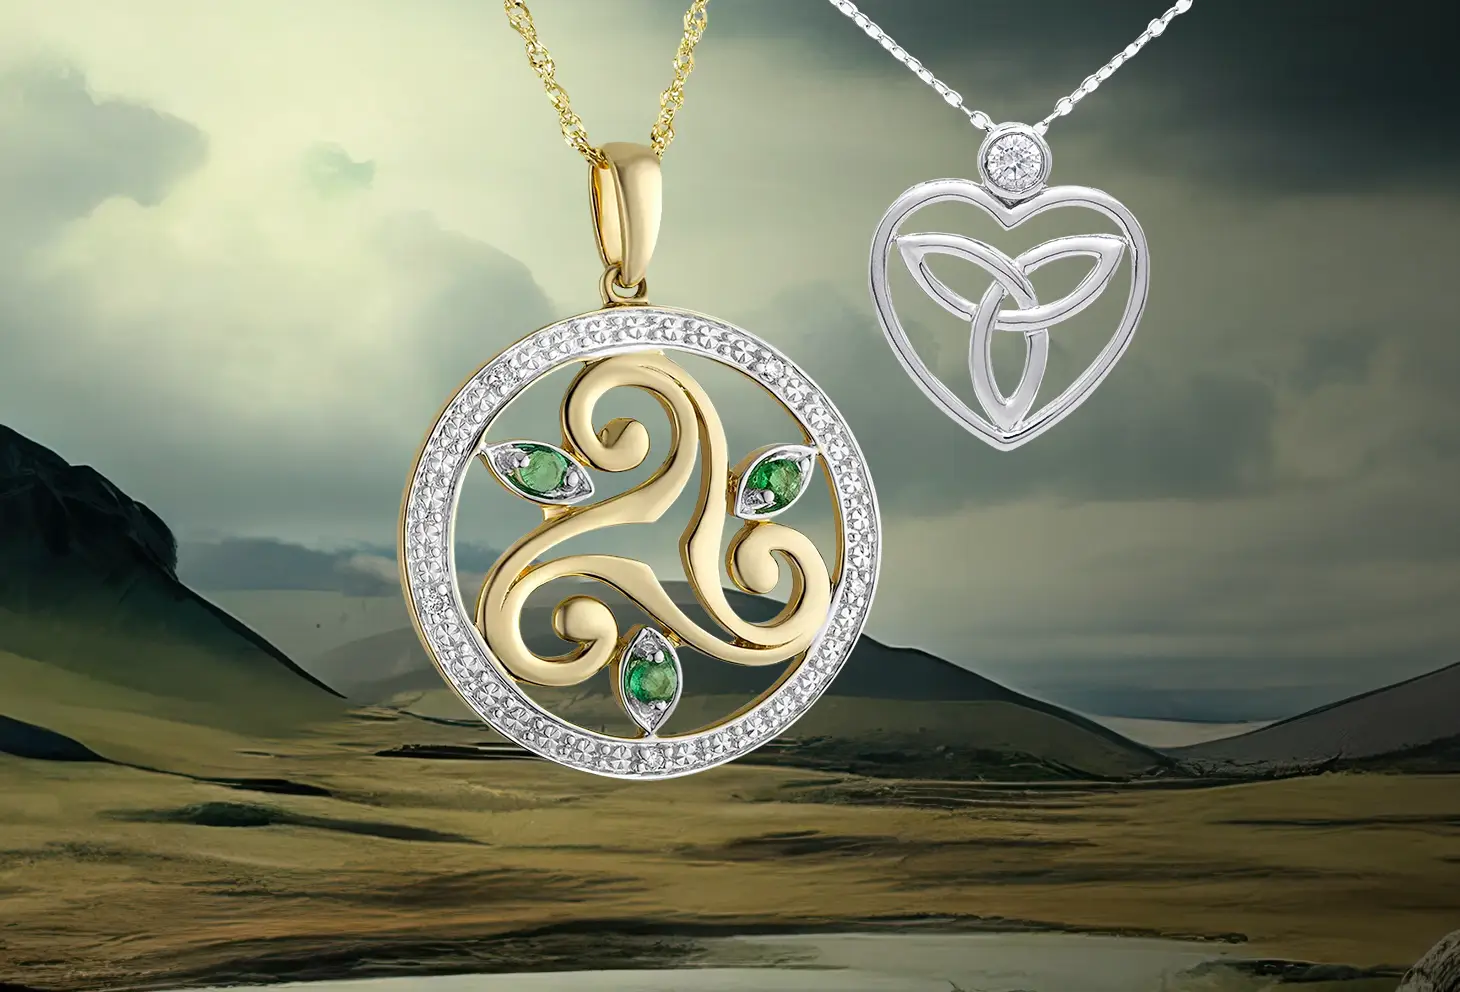 Intricate Celtic Knot Necklaces